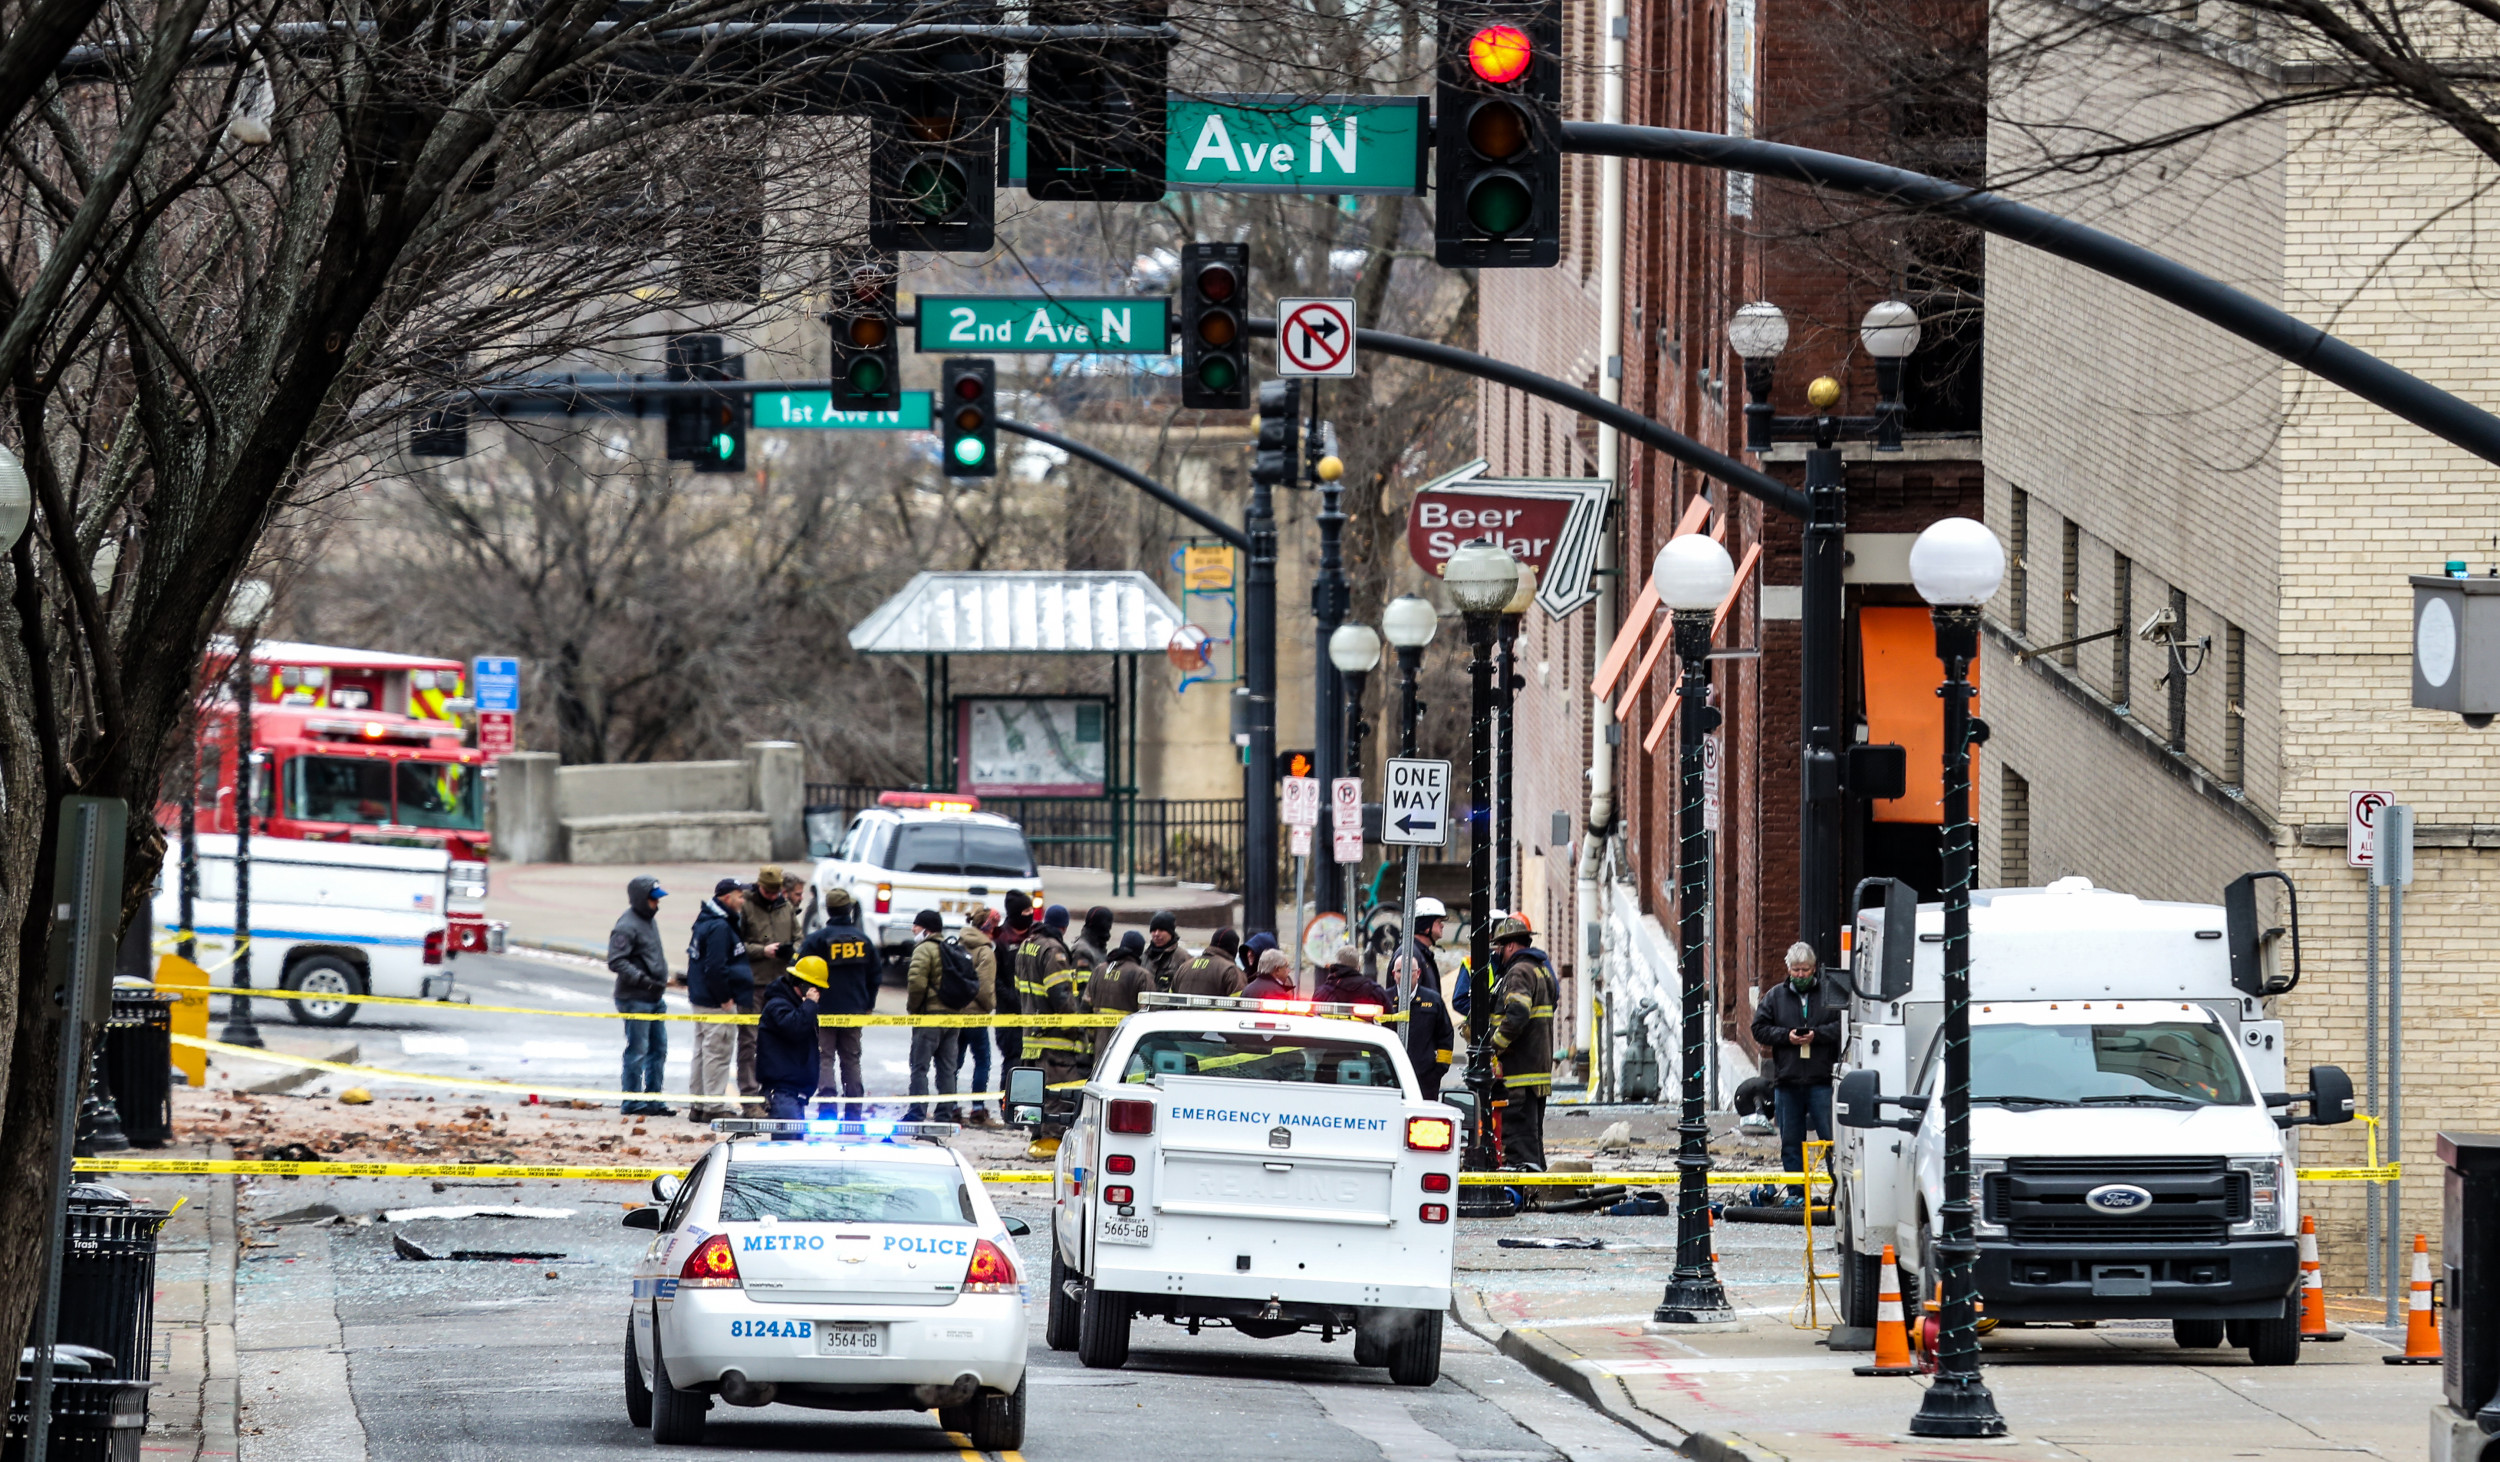 In the Nashville bombing, the suspect’s father and the AT&T building could be important clues